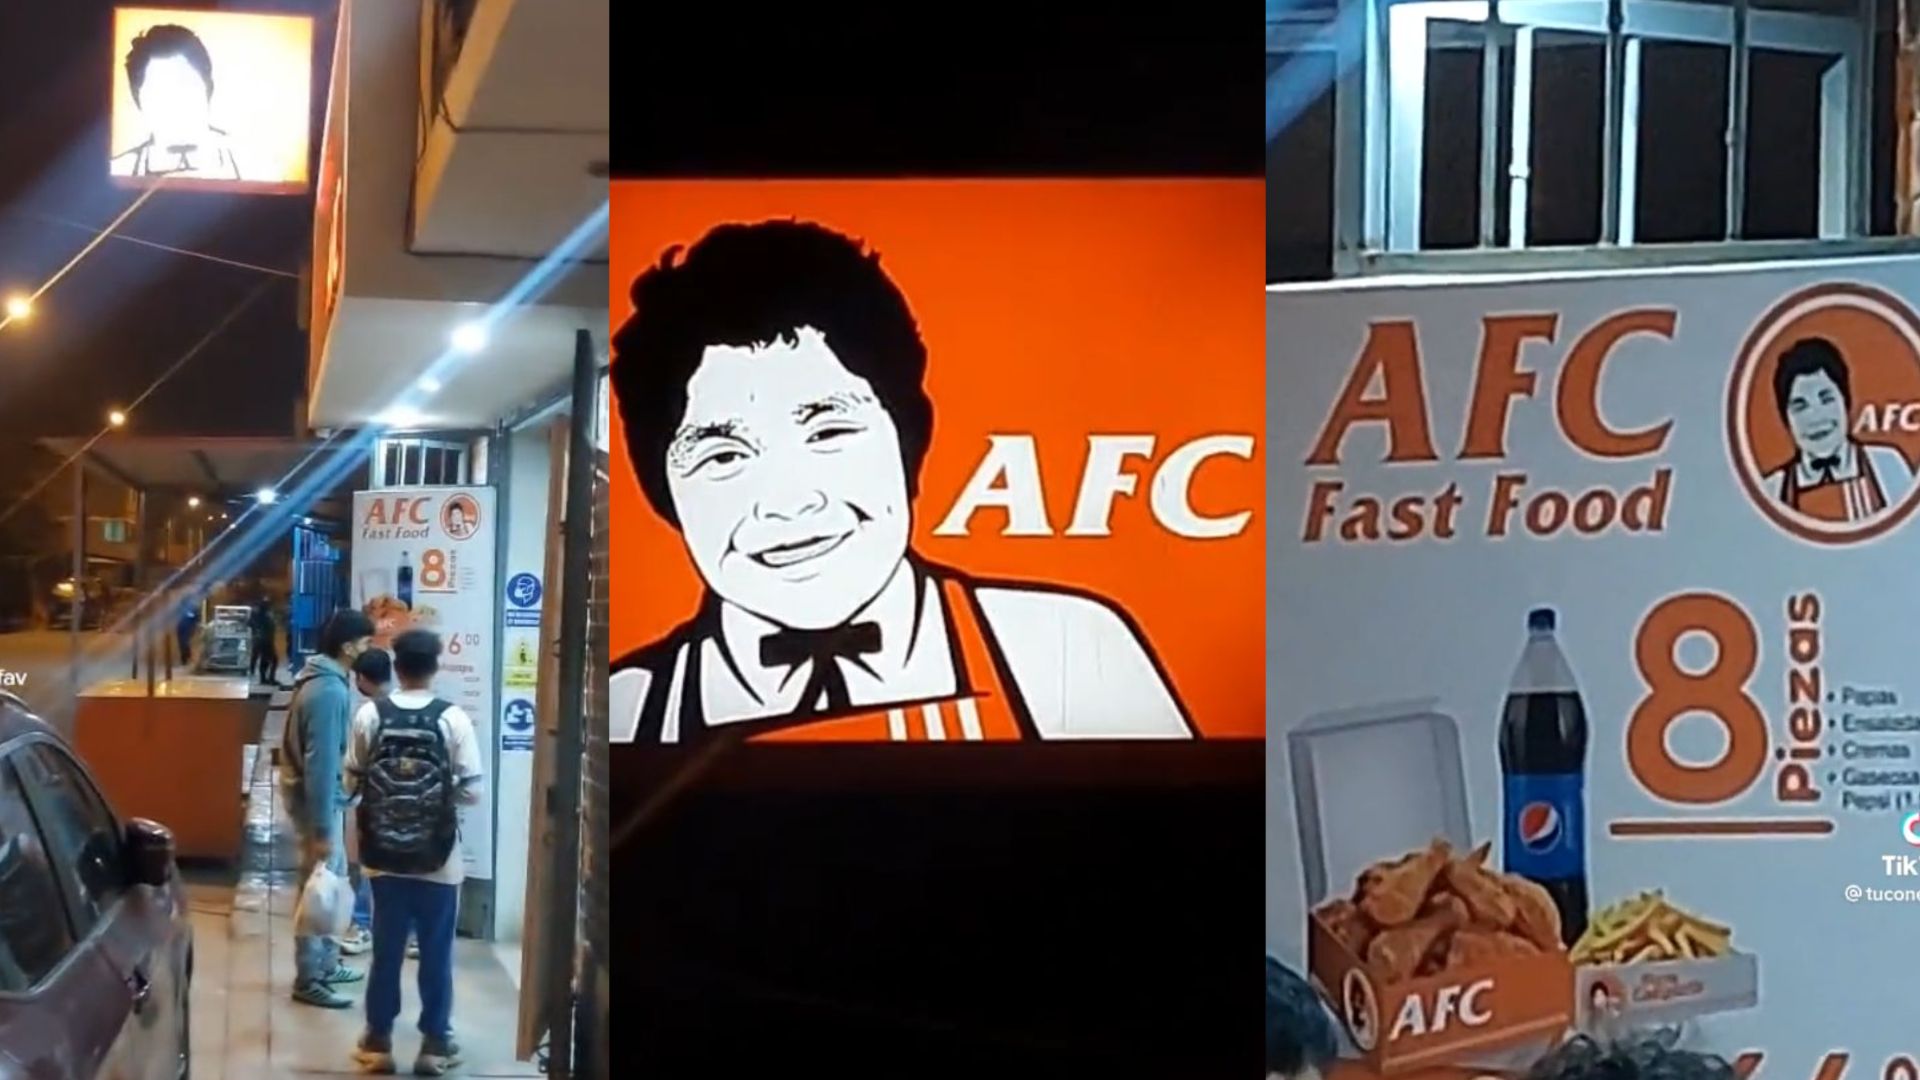 User records a place called AFC and turns on the networks for its resemblance to KFC.  (Capture)